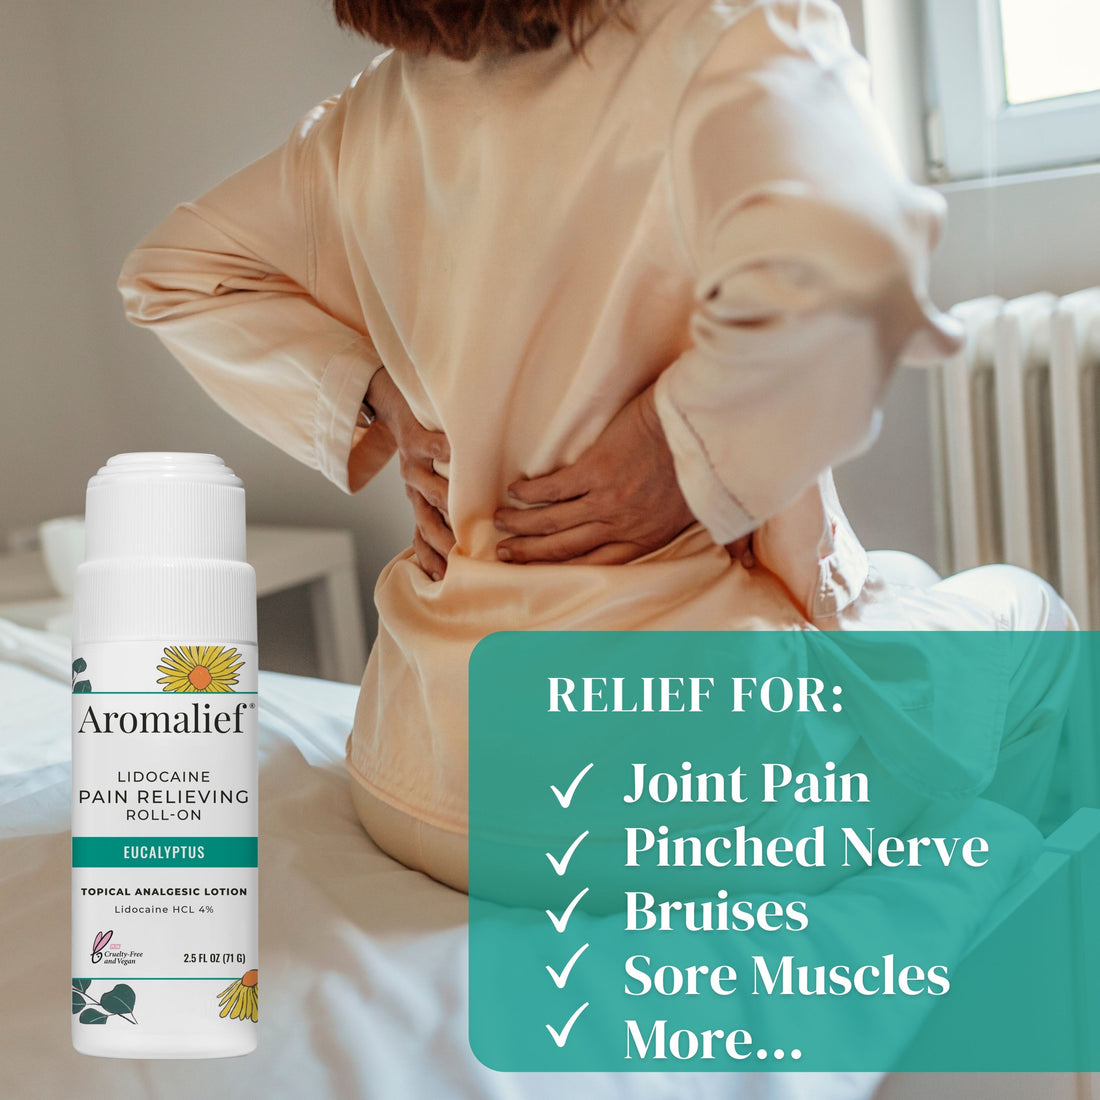 Aromalief roll-on vegan pain reliever for joints muscles and nerves